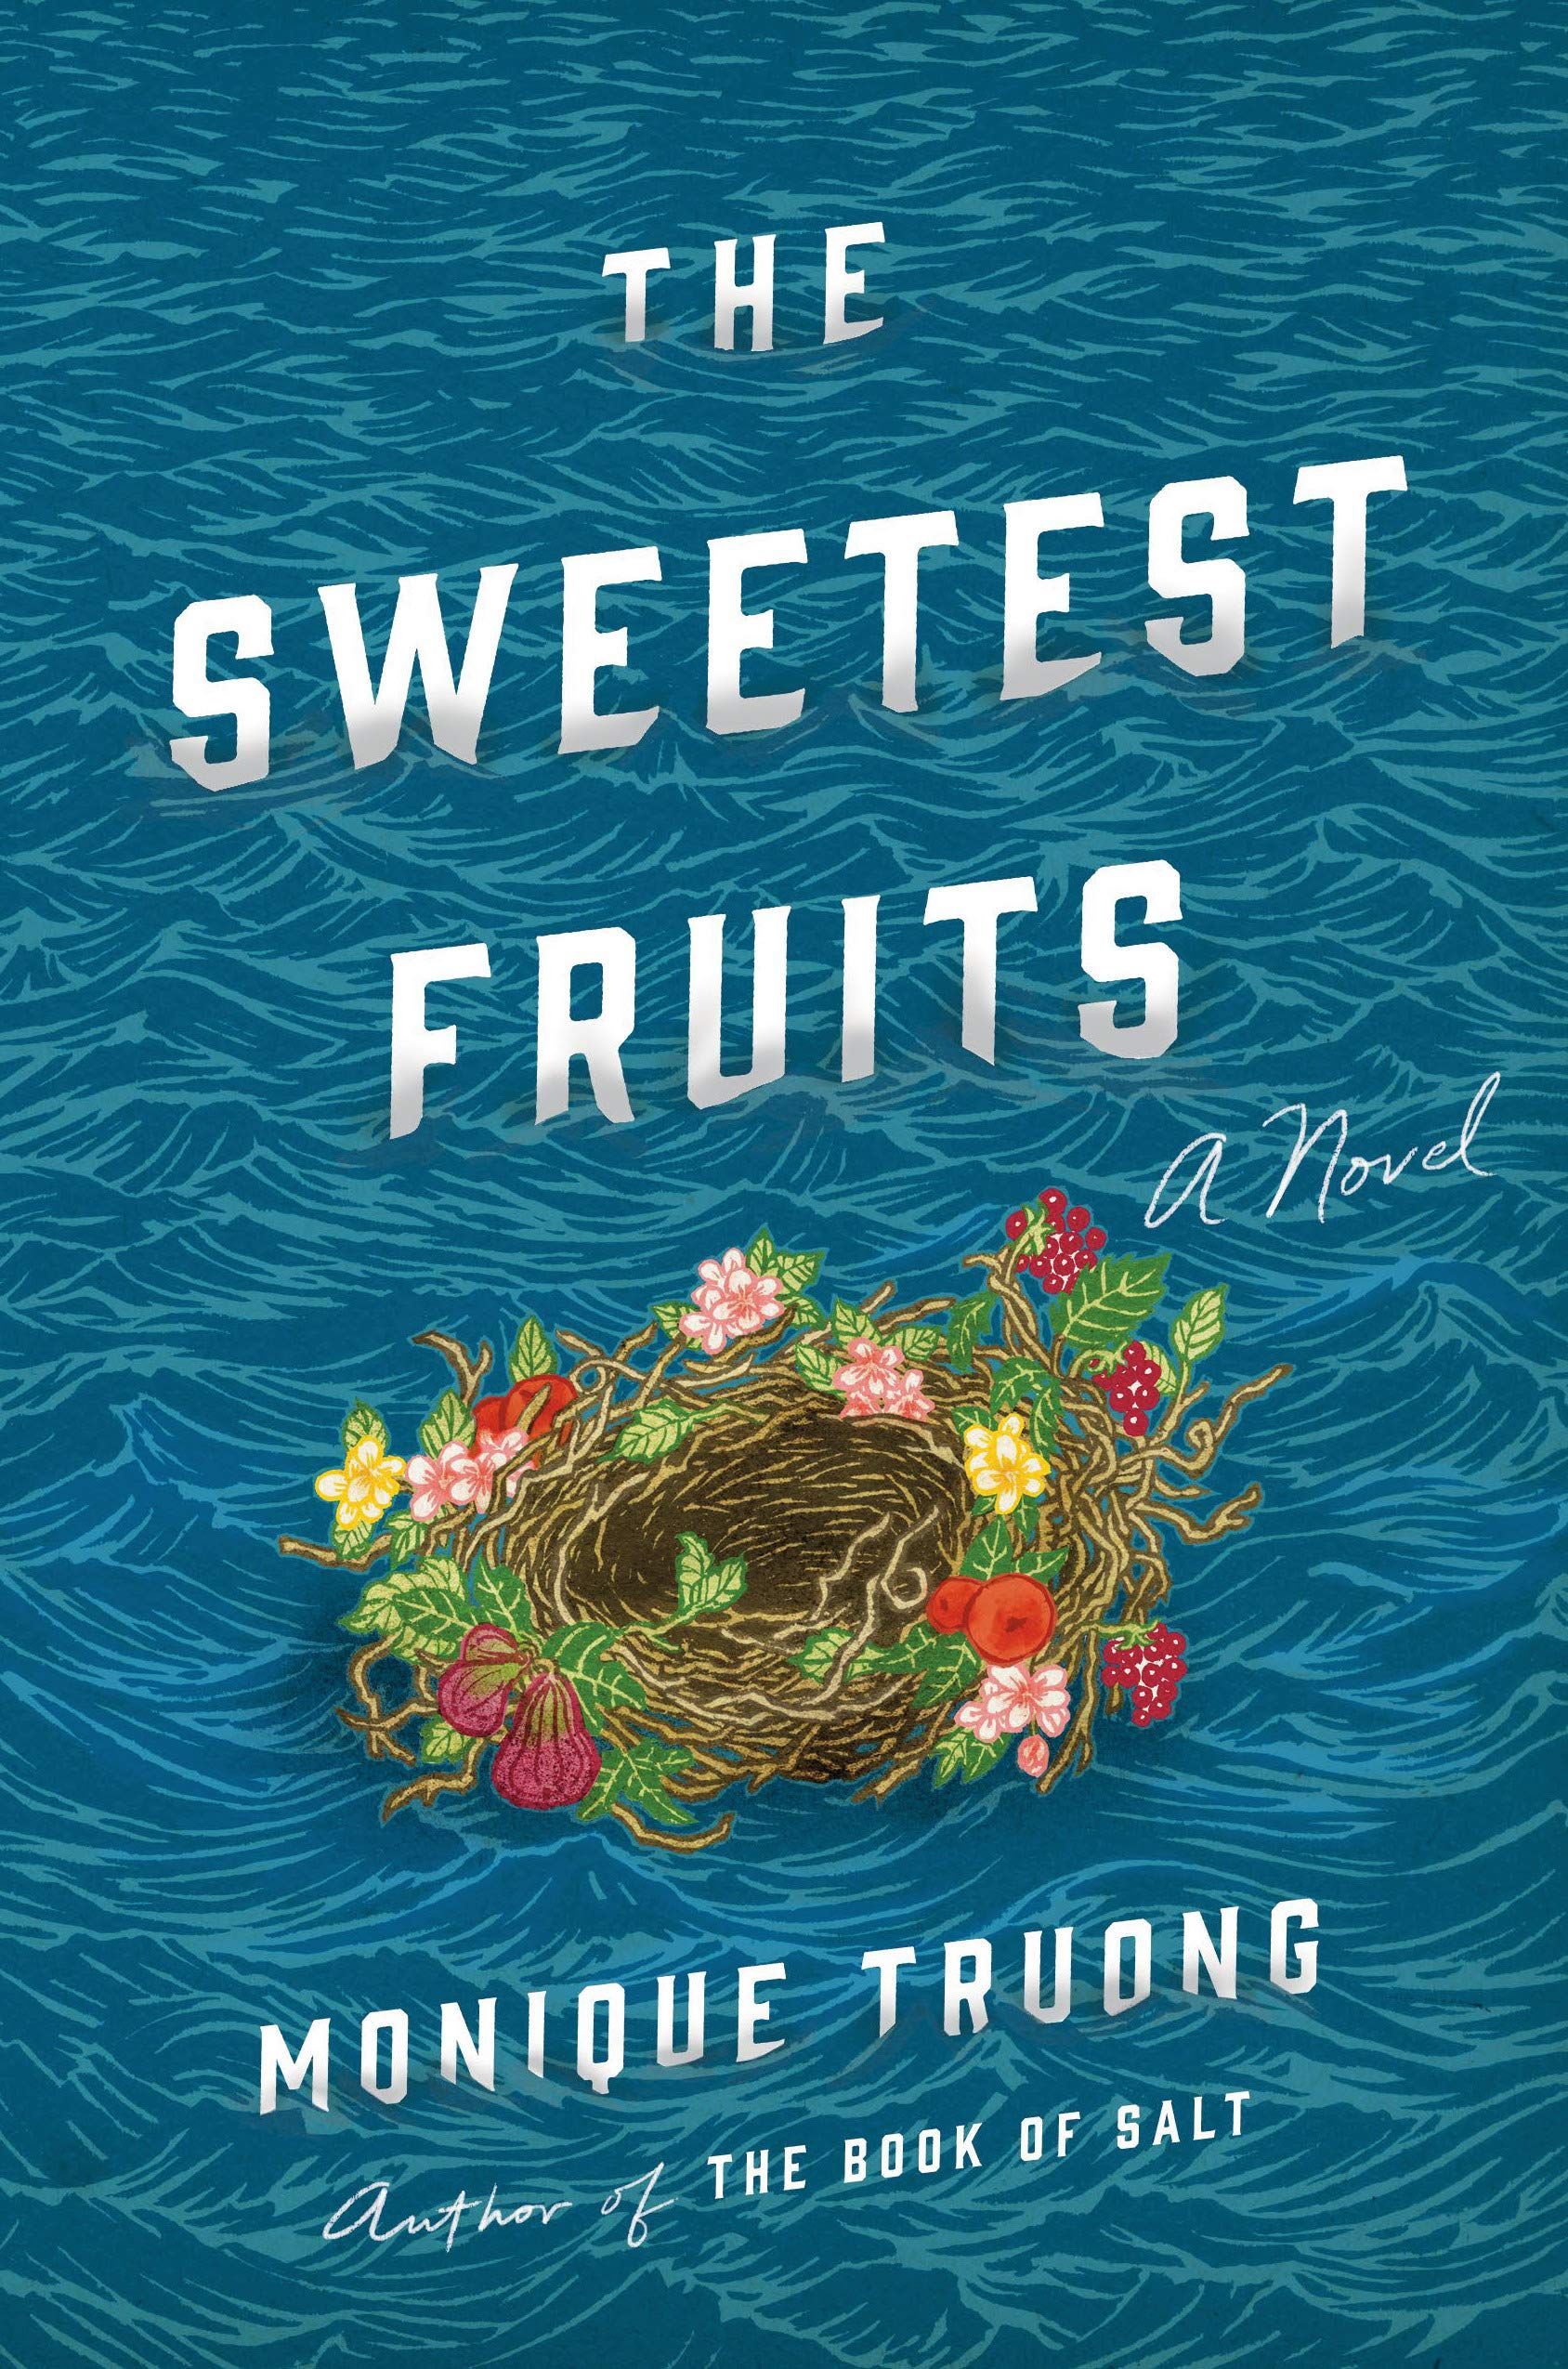 Re-Seeing the Present: On Monique Truong’s “The Sweetest Fruits”